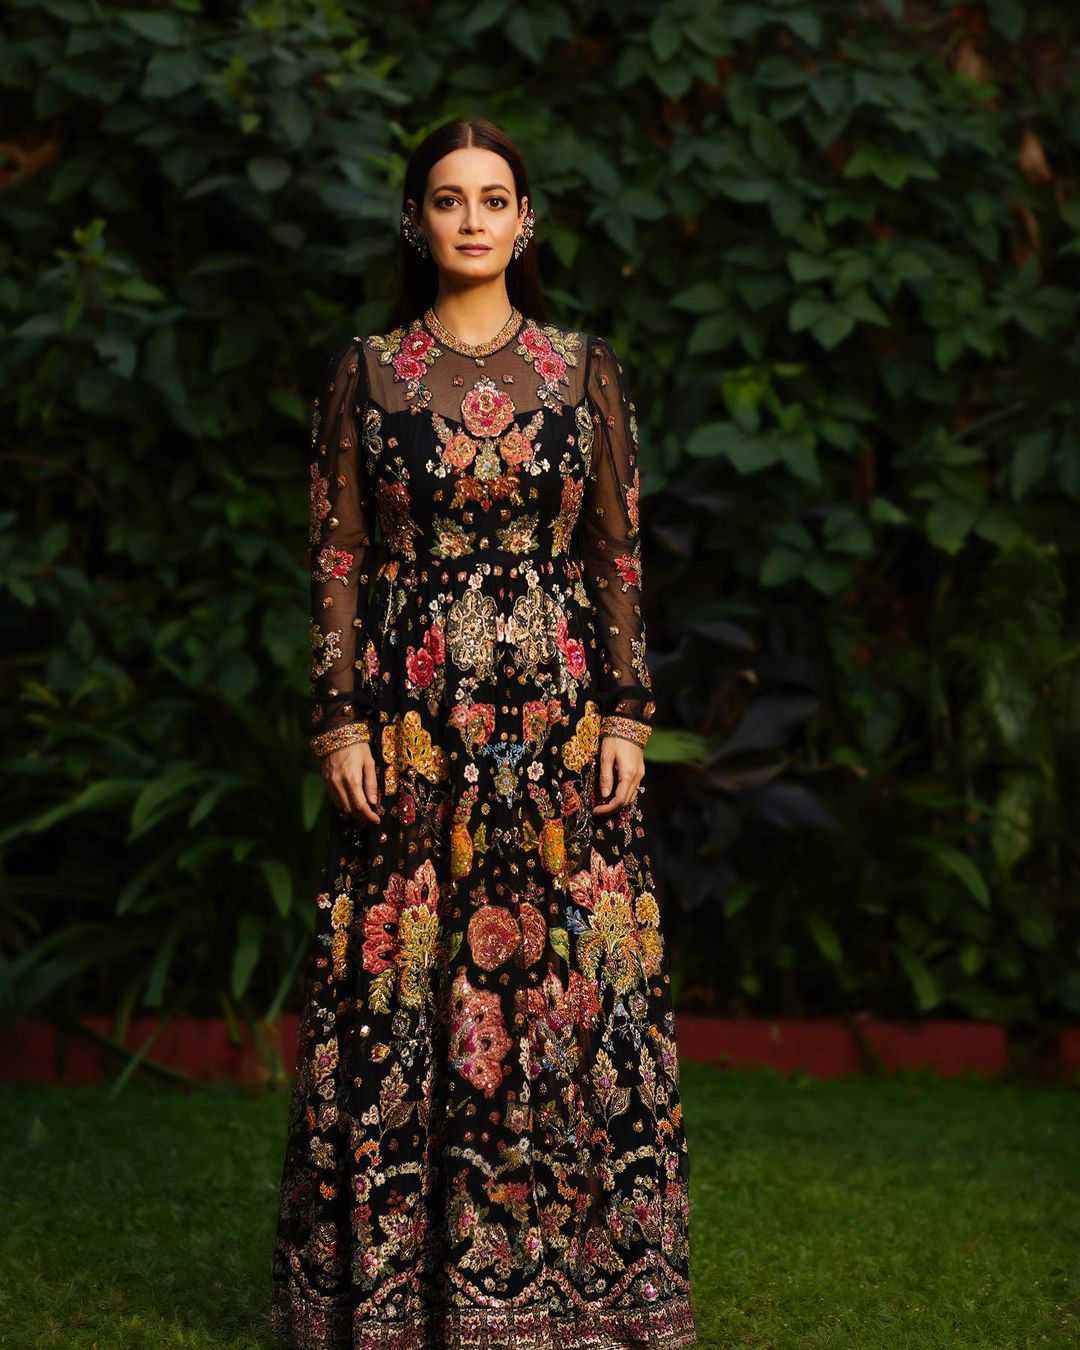 dia-mirza-s-floral-gown-memerising-looks